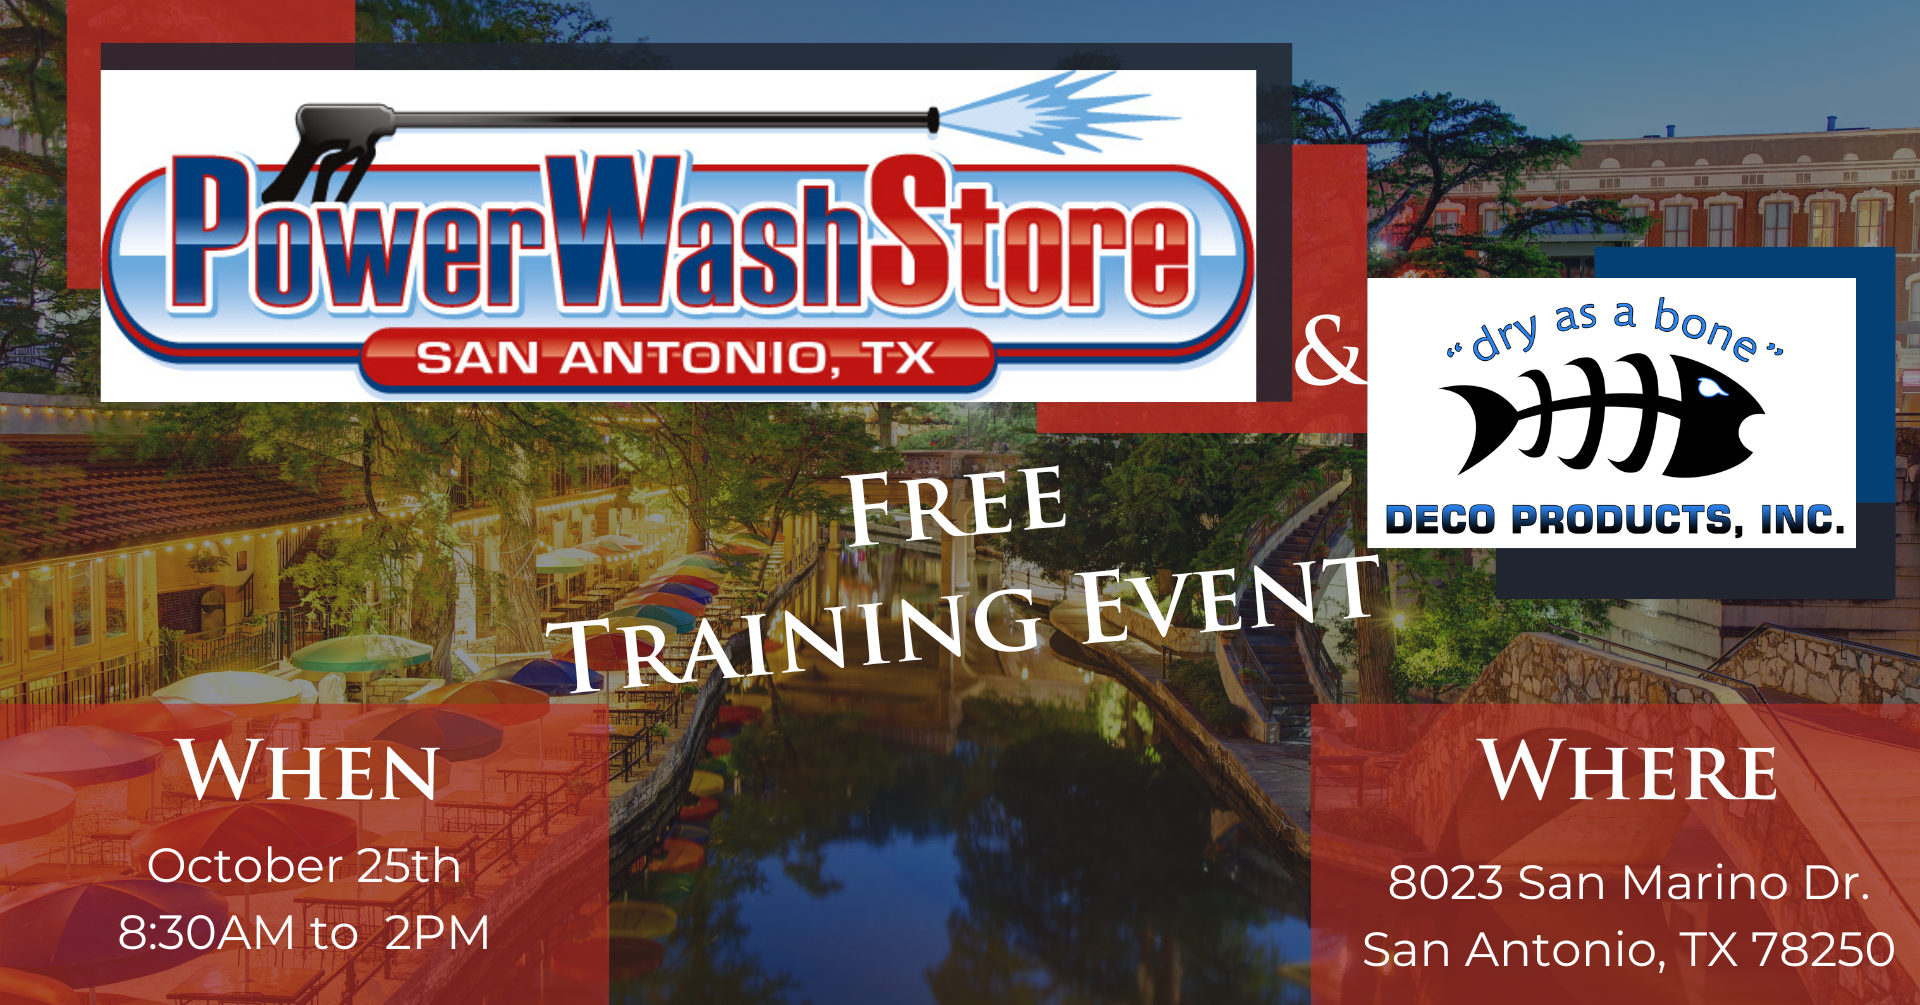 Flyer promoting a free training event in San Antonio